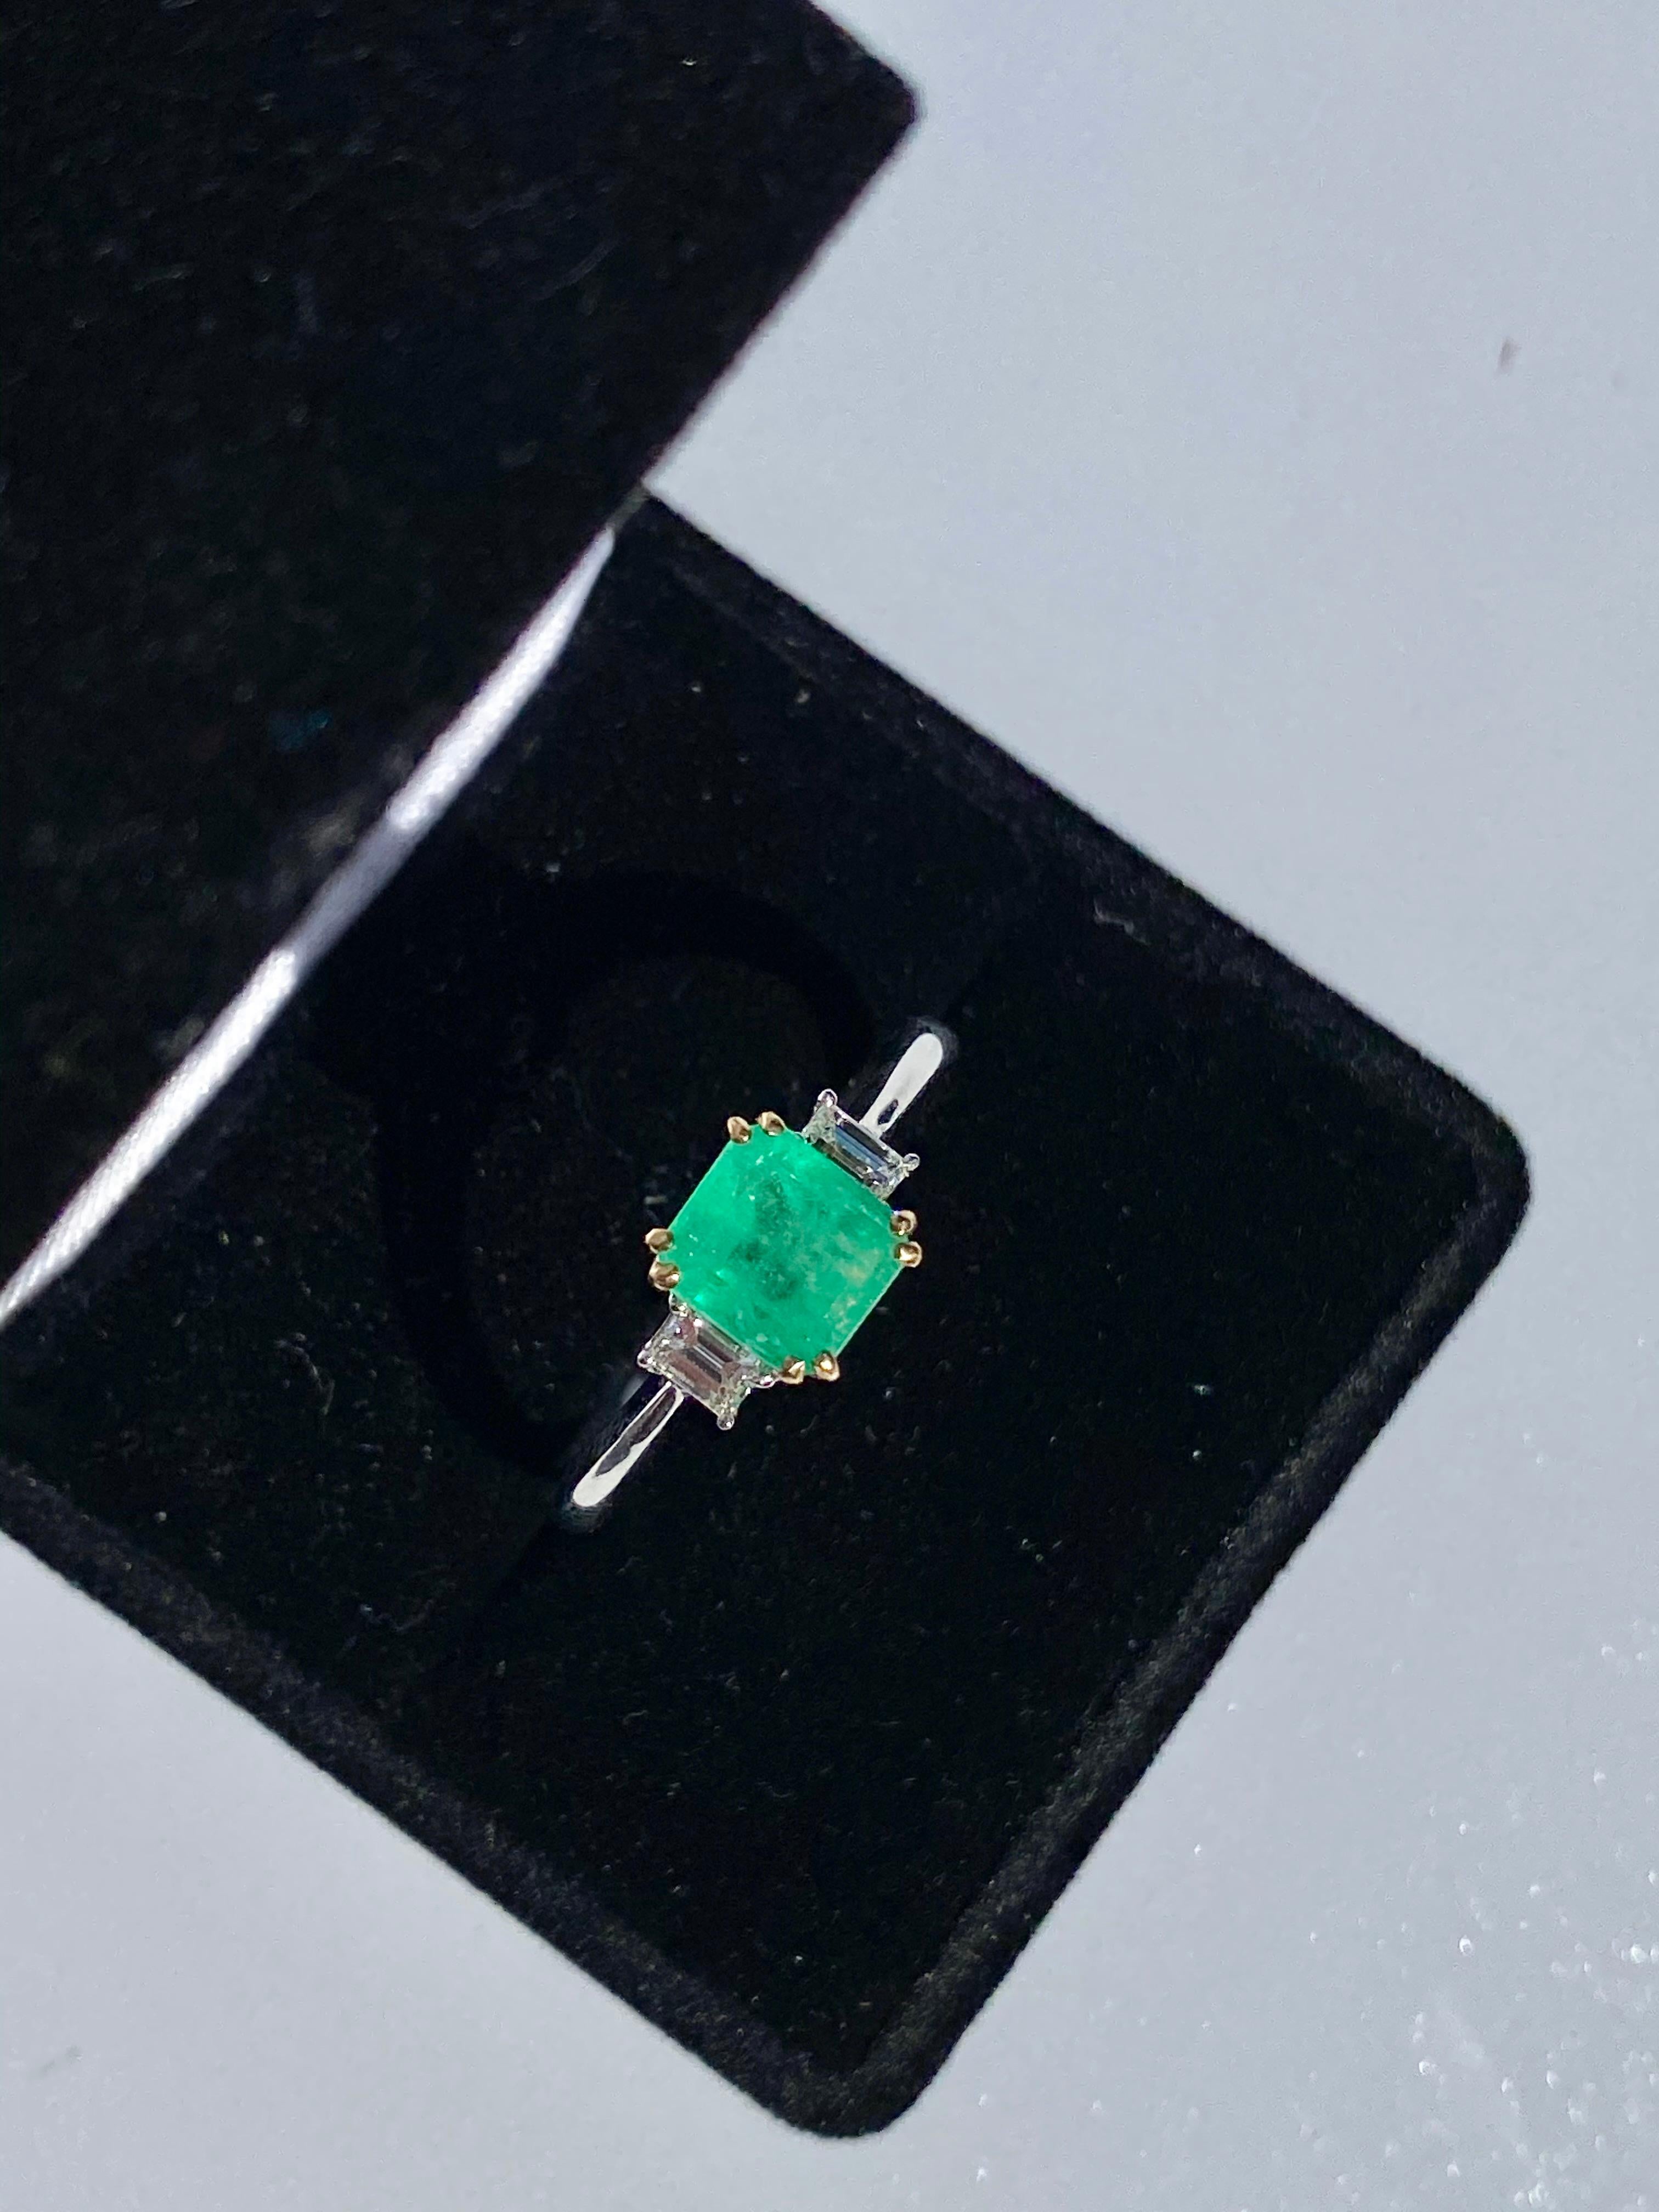 Centering a 1.20 Carat Emerald-Cut Colombian Emerald, shouldered by four Baguette-Cut Diamonds totaling 0.24 Carats, and set in 18K White Gold, this Colombian beauty rests upon a modern classic.

Details:
✔ Stone: Emerald
✔ Stone Weight: 1.20